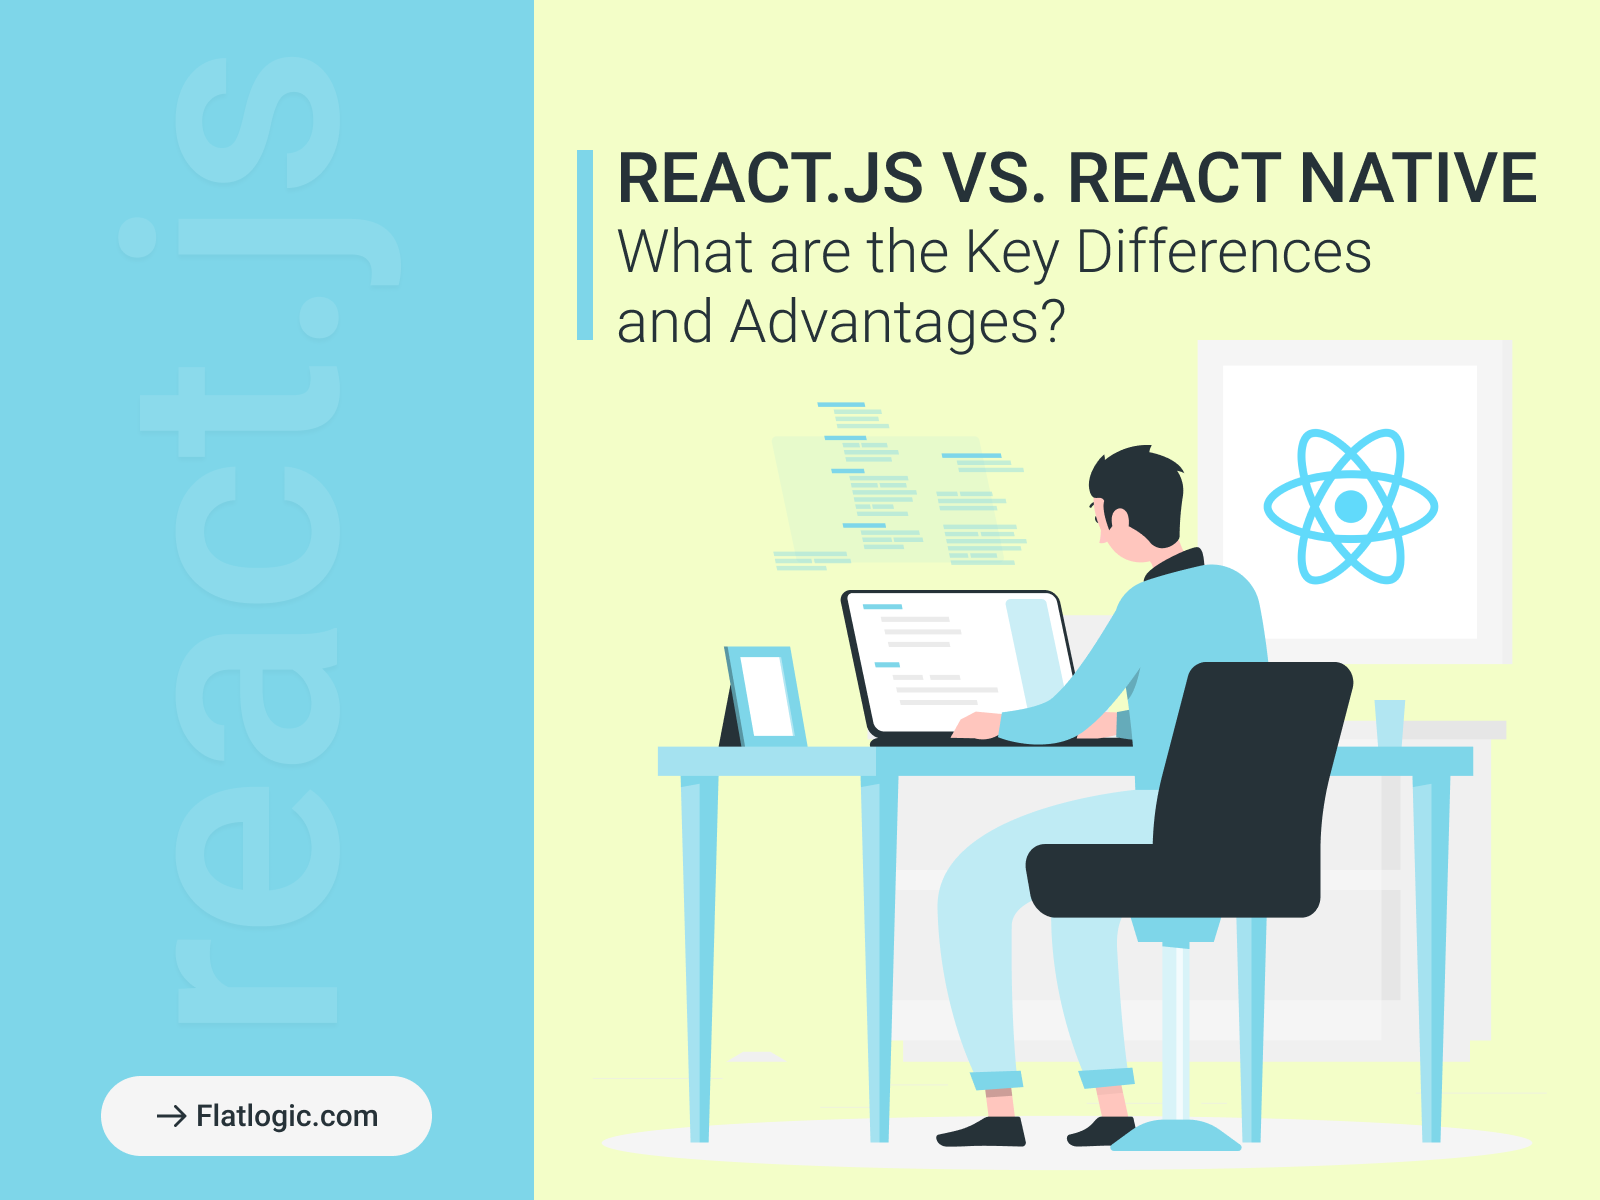 React.js vs. React Native. What are the Key Differences and Advantages?